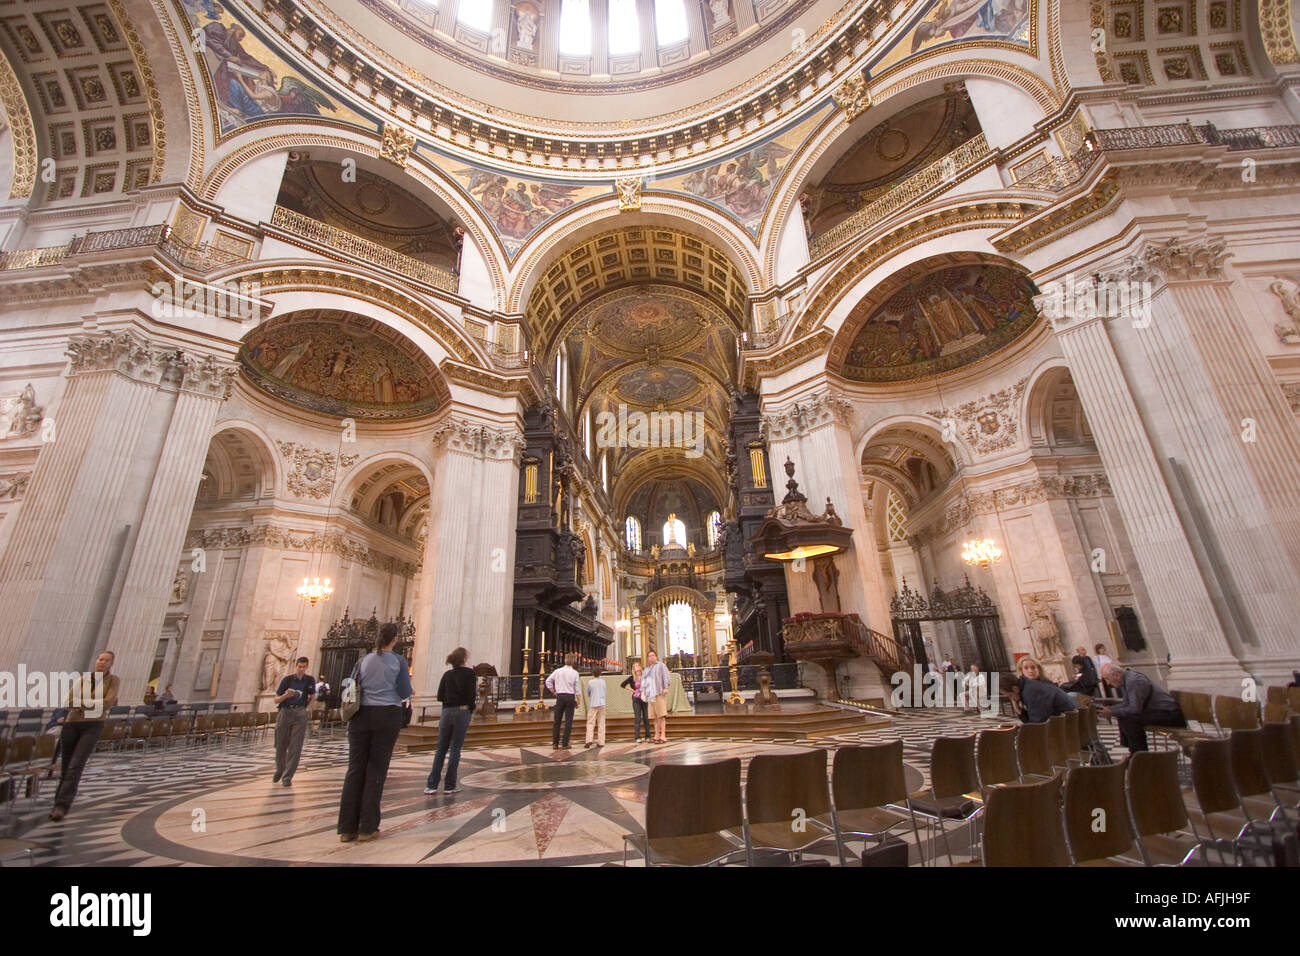 Interior Of St Paul S Cathedral Designed By Sir Christopher